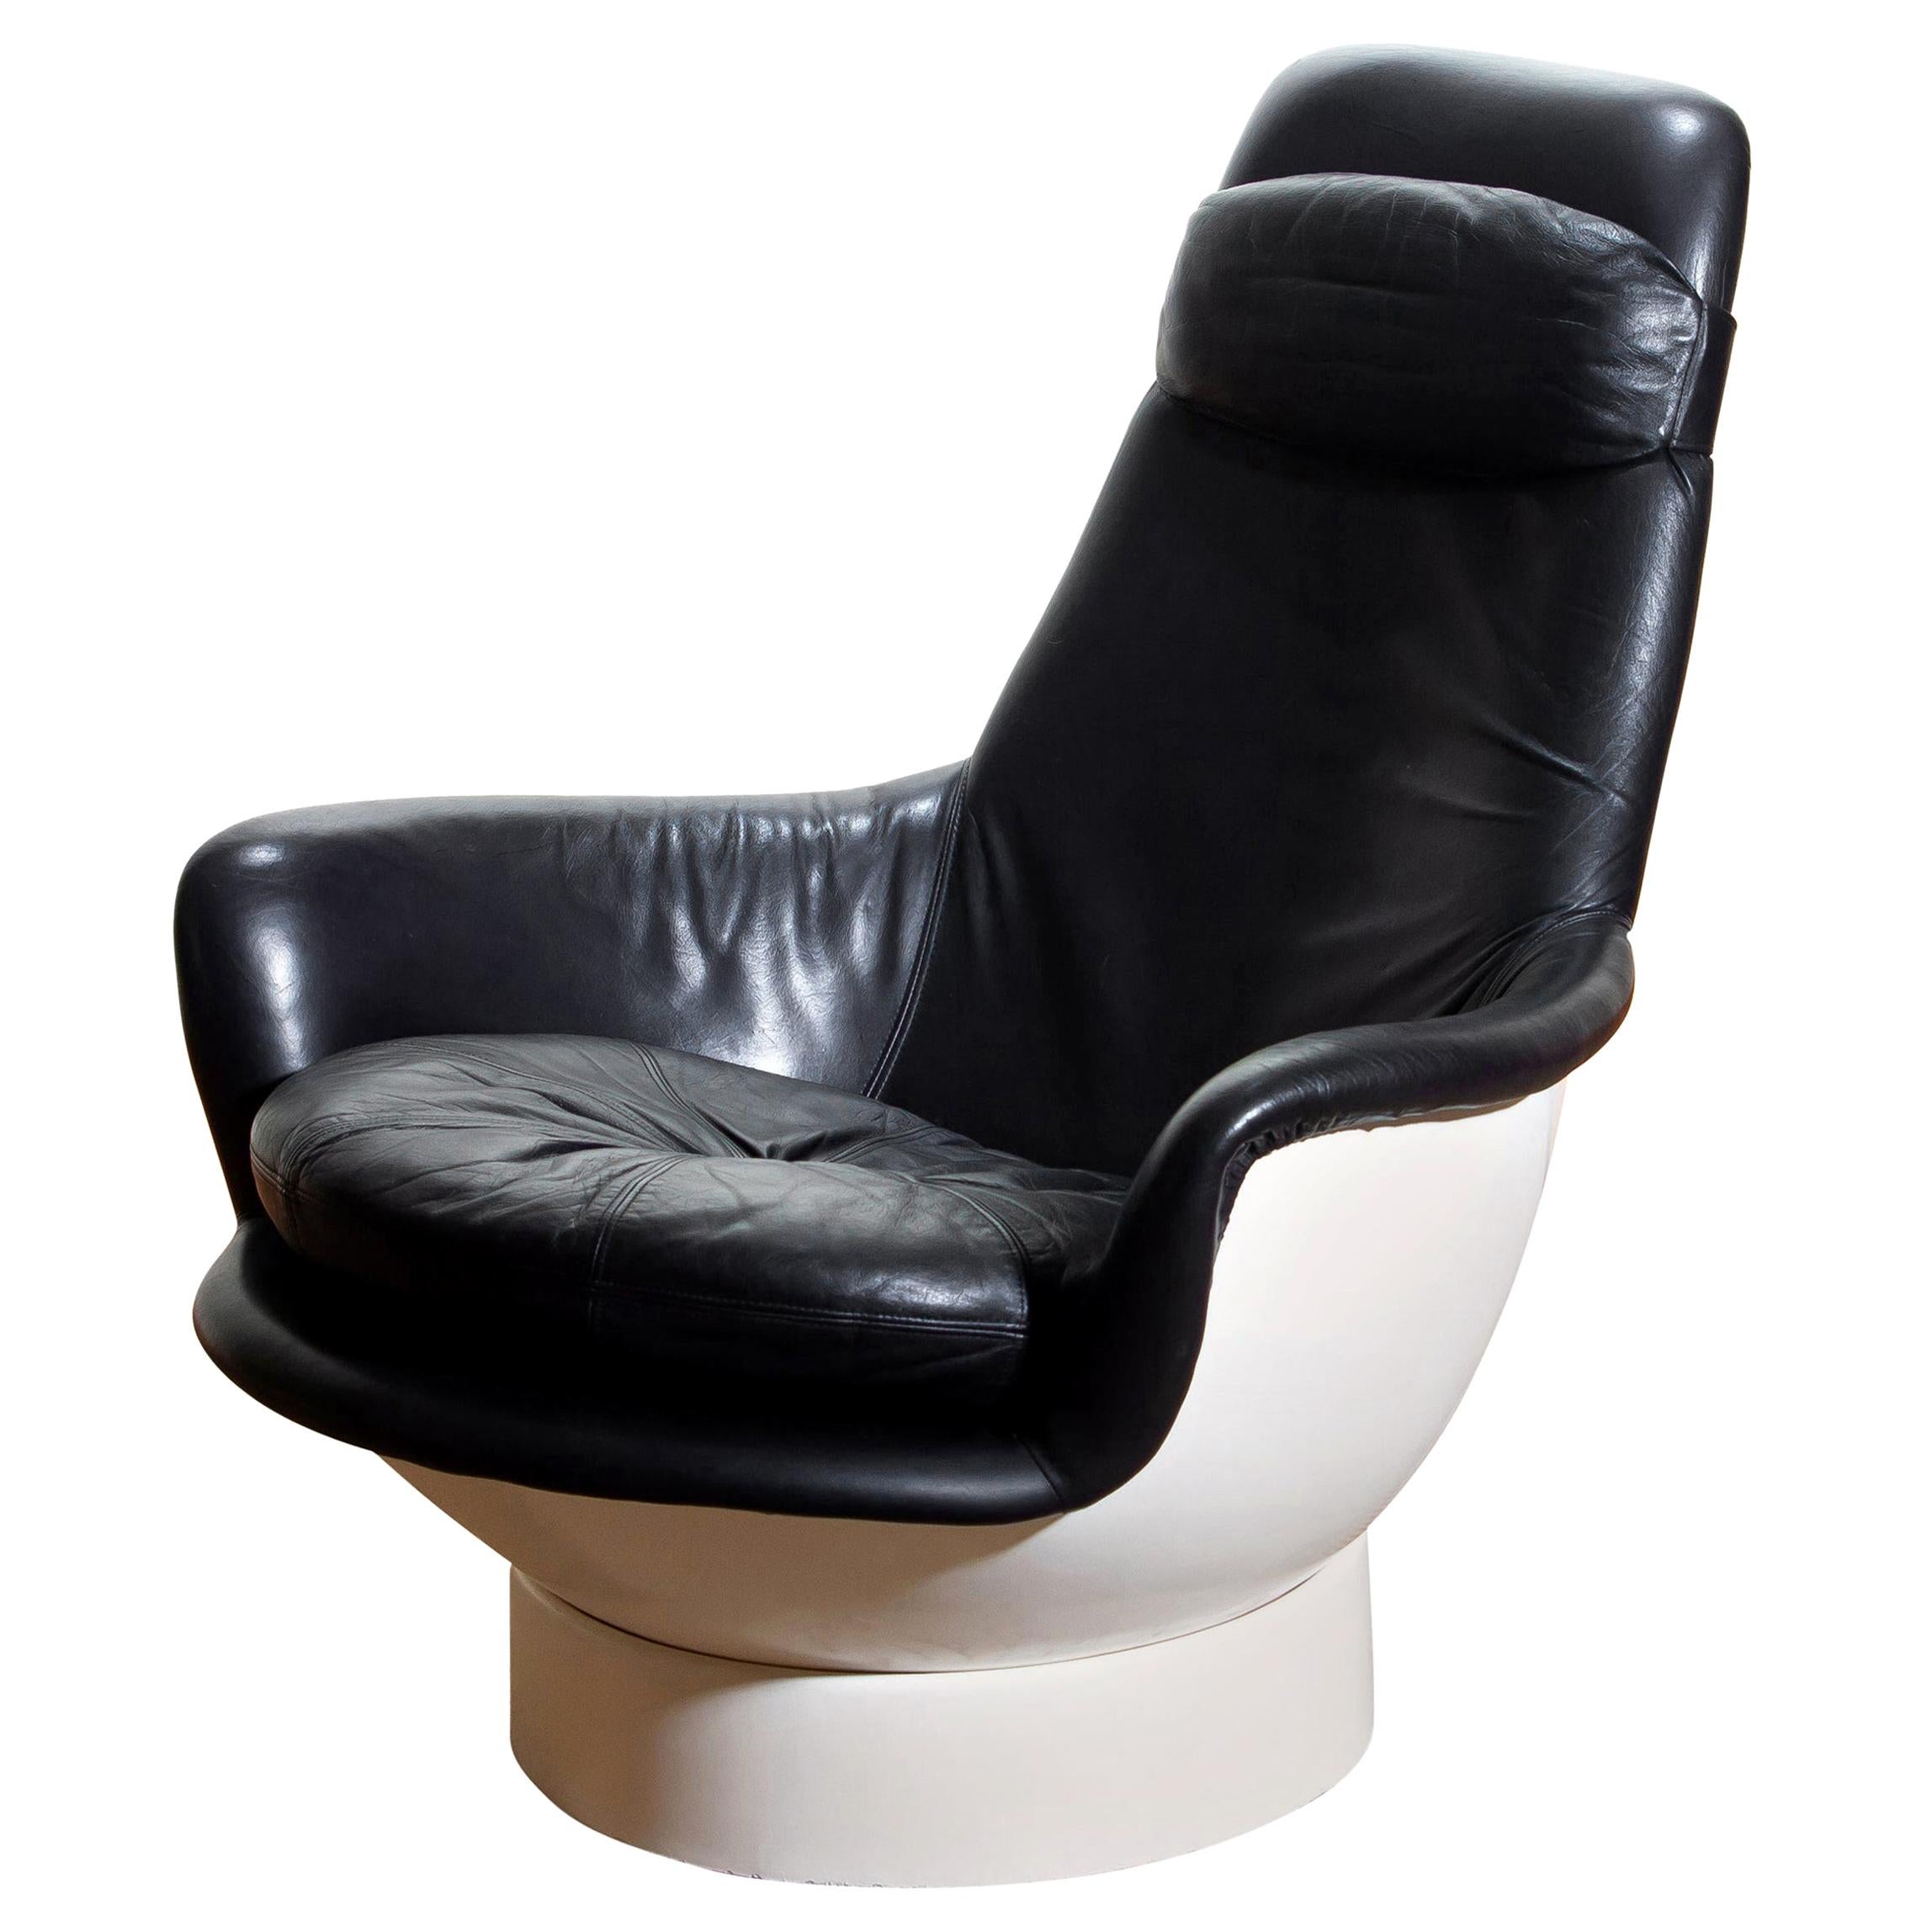 1970s Space Age White Fiberglass Lounge / Easy Chair "Tina" by Peem Oy, Finland